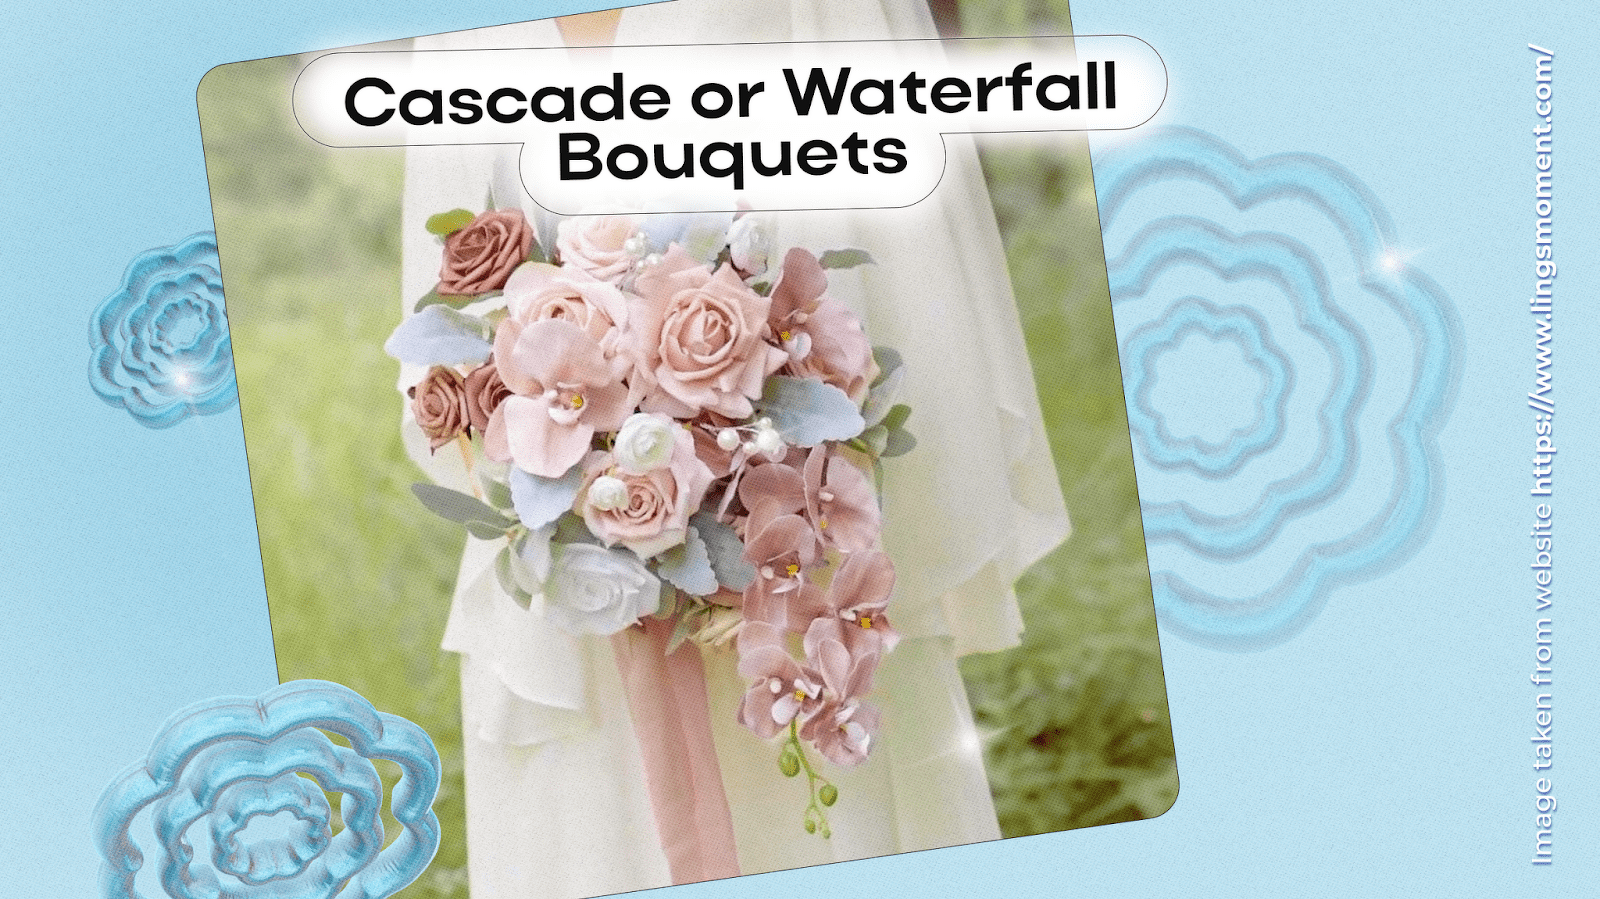 Cascade or Waterfall Bouquets